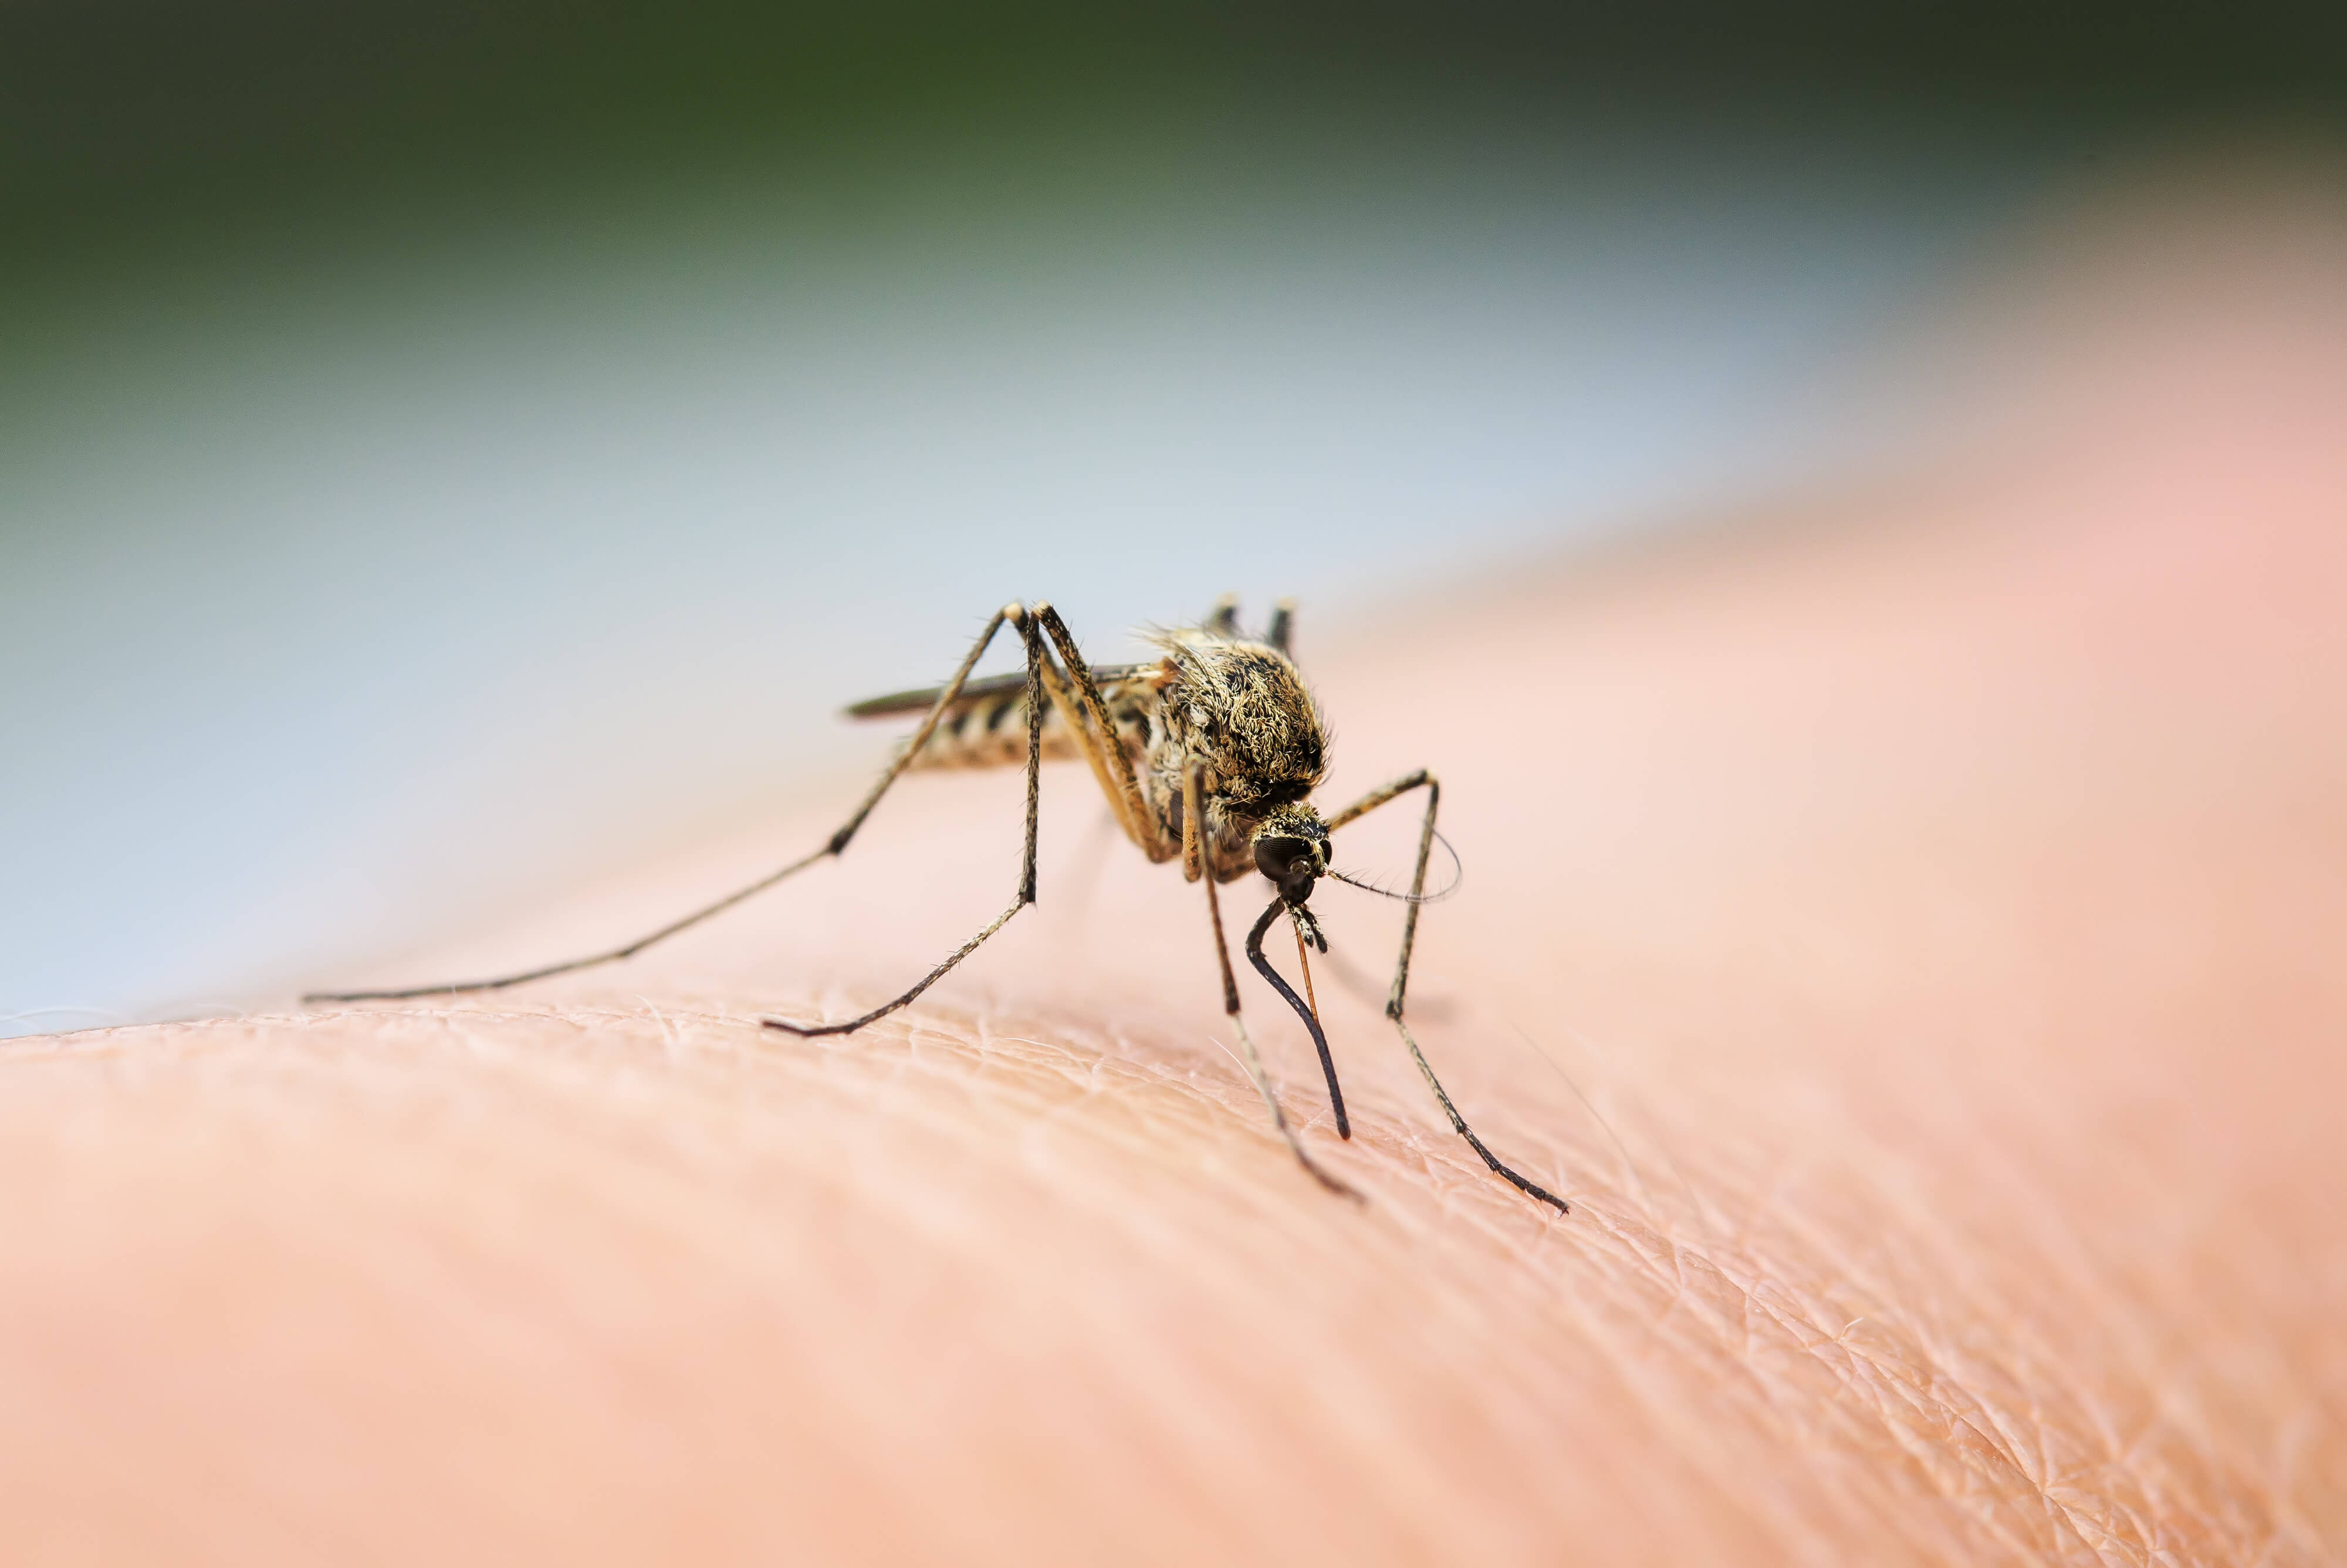 Mosquitos kill over 400,000 people globally every year